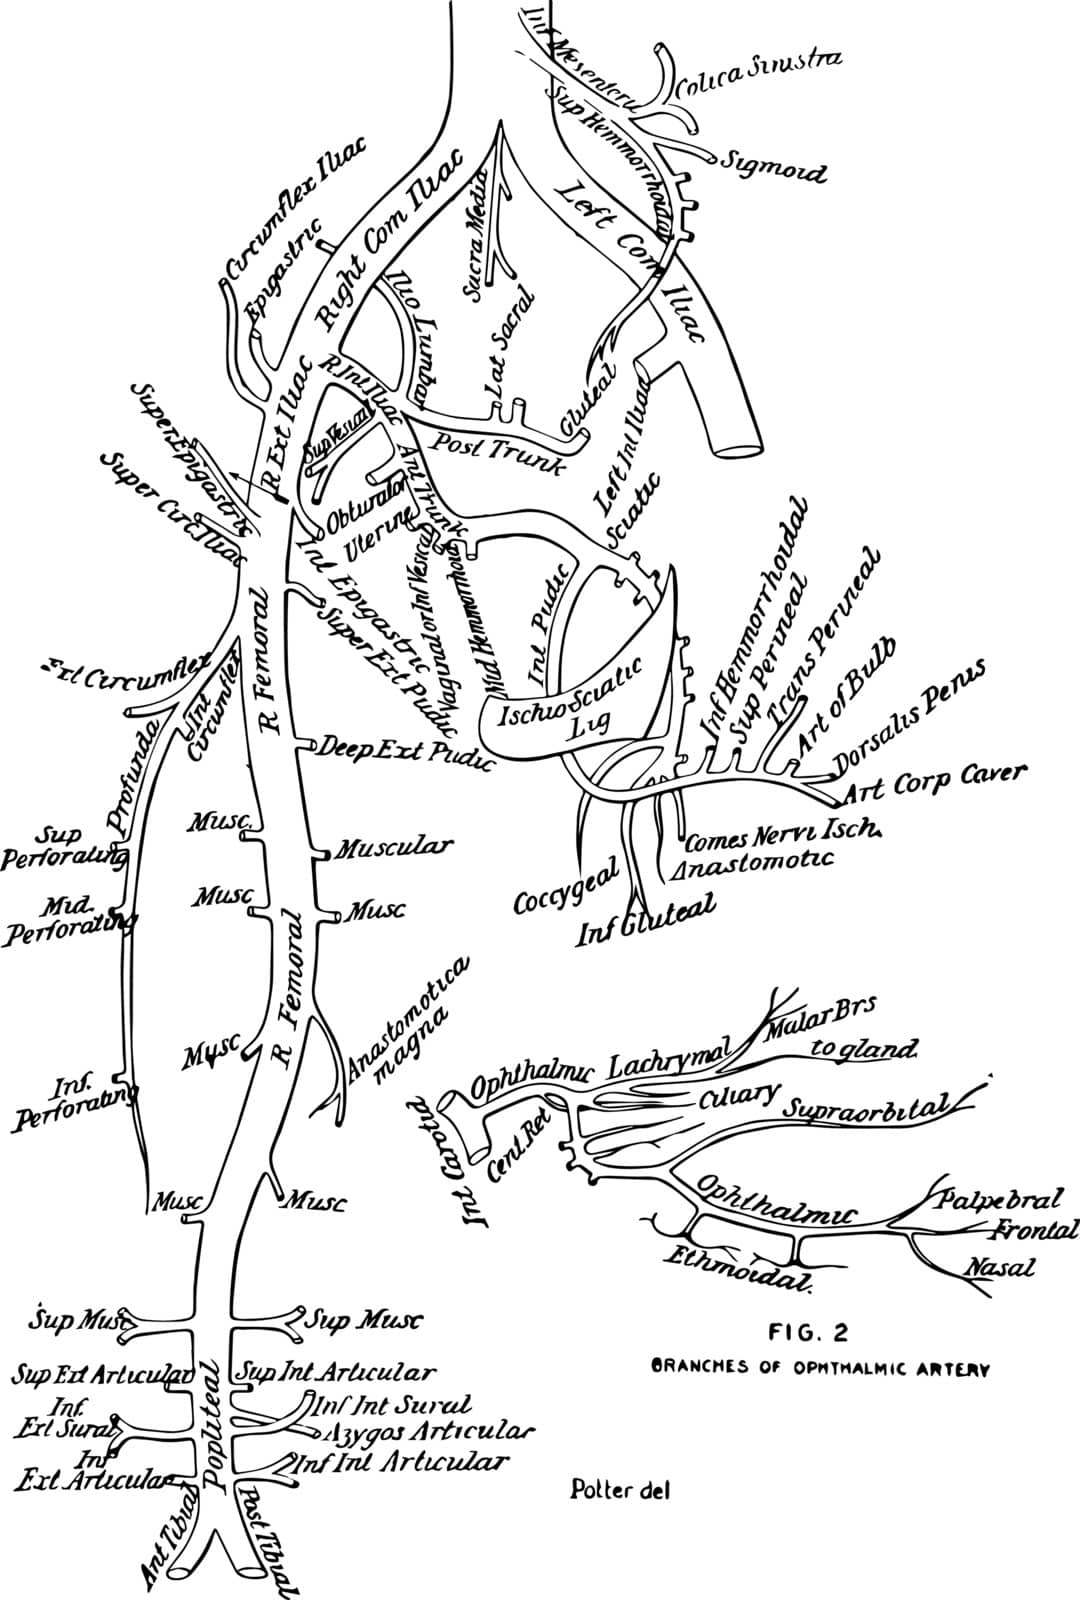 This diagram represents Branches of the Aorta vintage line drawing or engraving illustration.